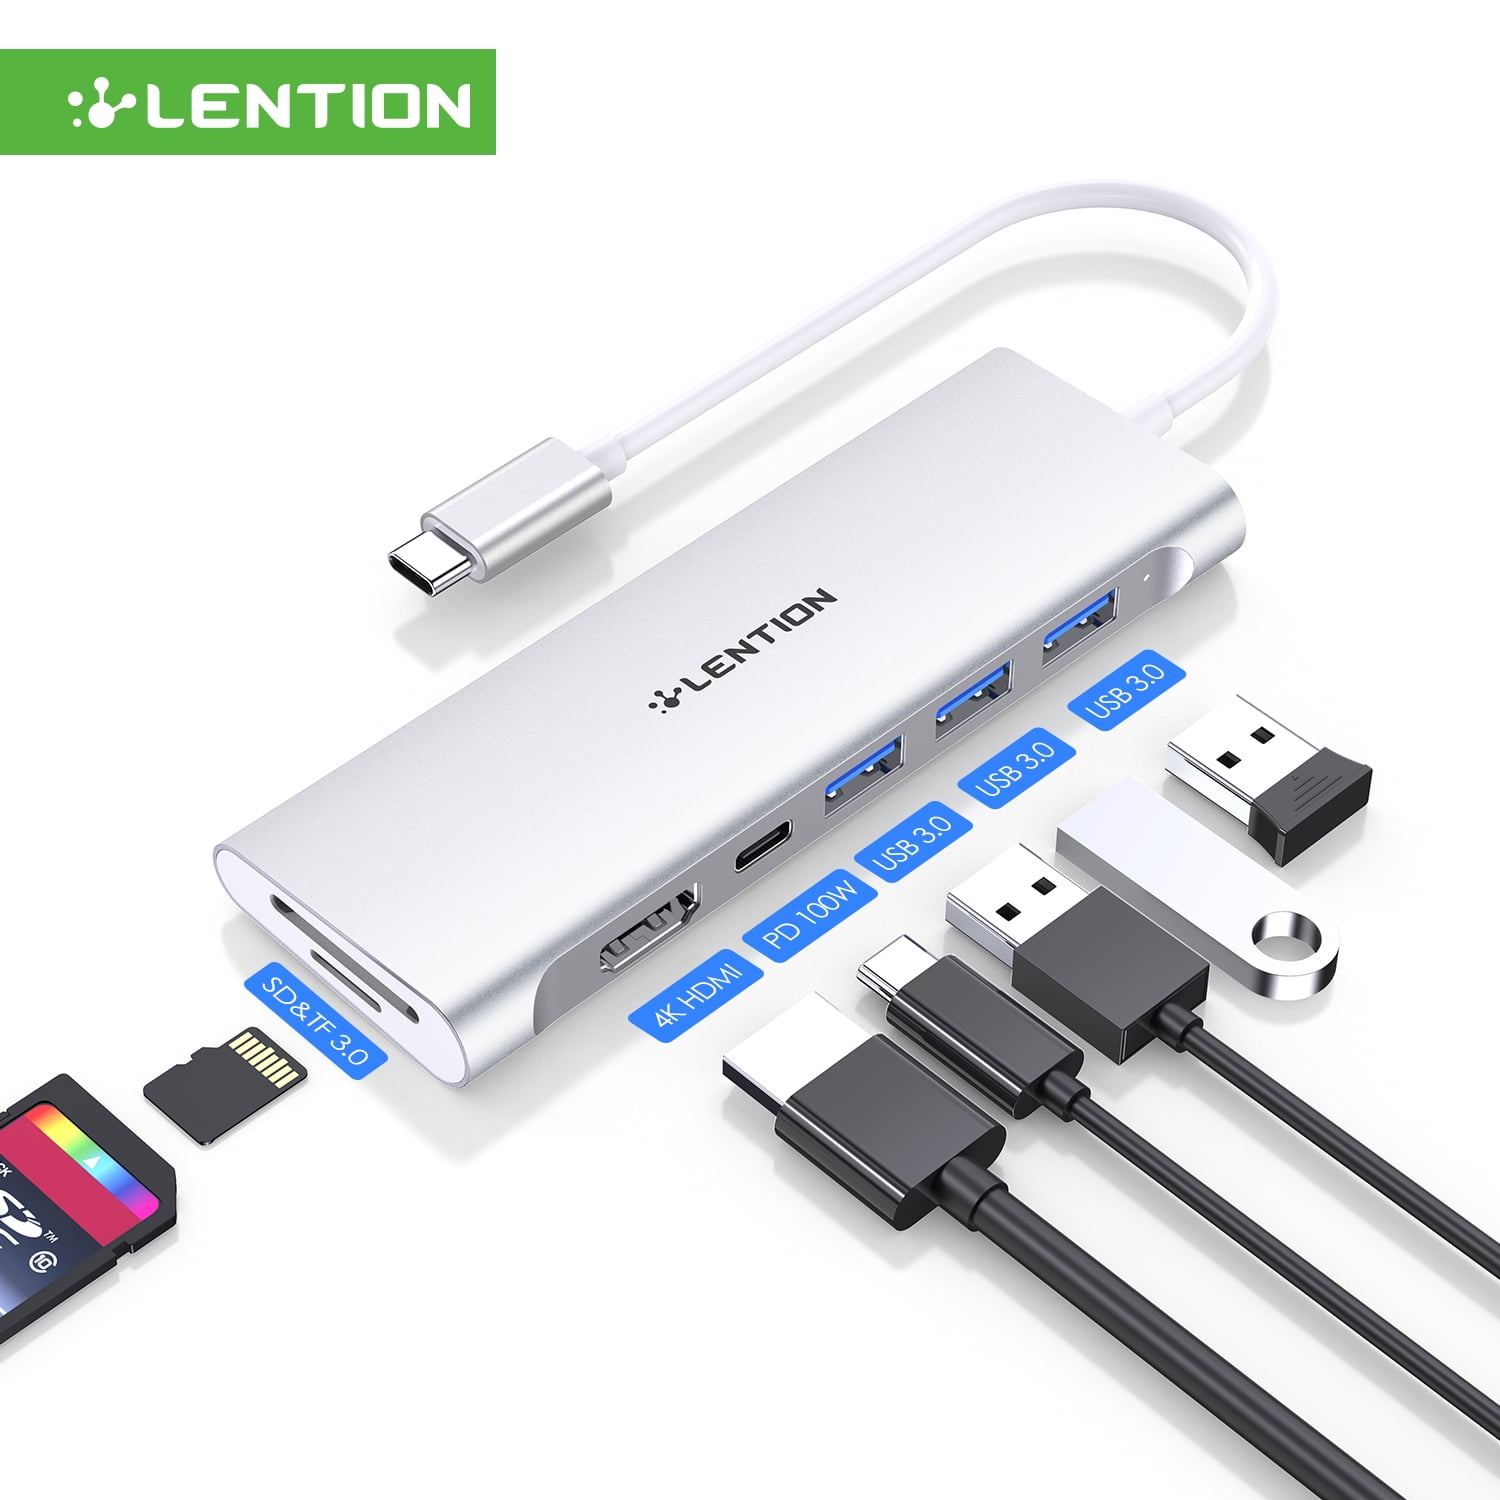 LENTION USB C Hub,USB C 7-in-1 Multiport Adapter with 4K HDMI,3 USB  3.0,100W PD,SD/TF Card Reader,Laptop Docking Station for 2023-2016 MacBook  Pro,New Mac Air,Chromebook,More,C36b 